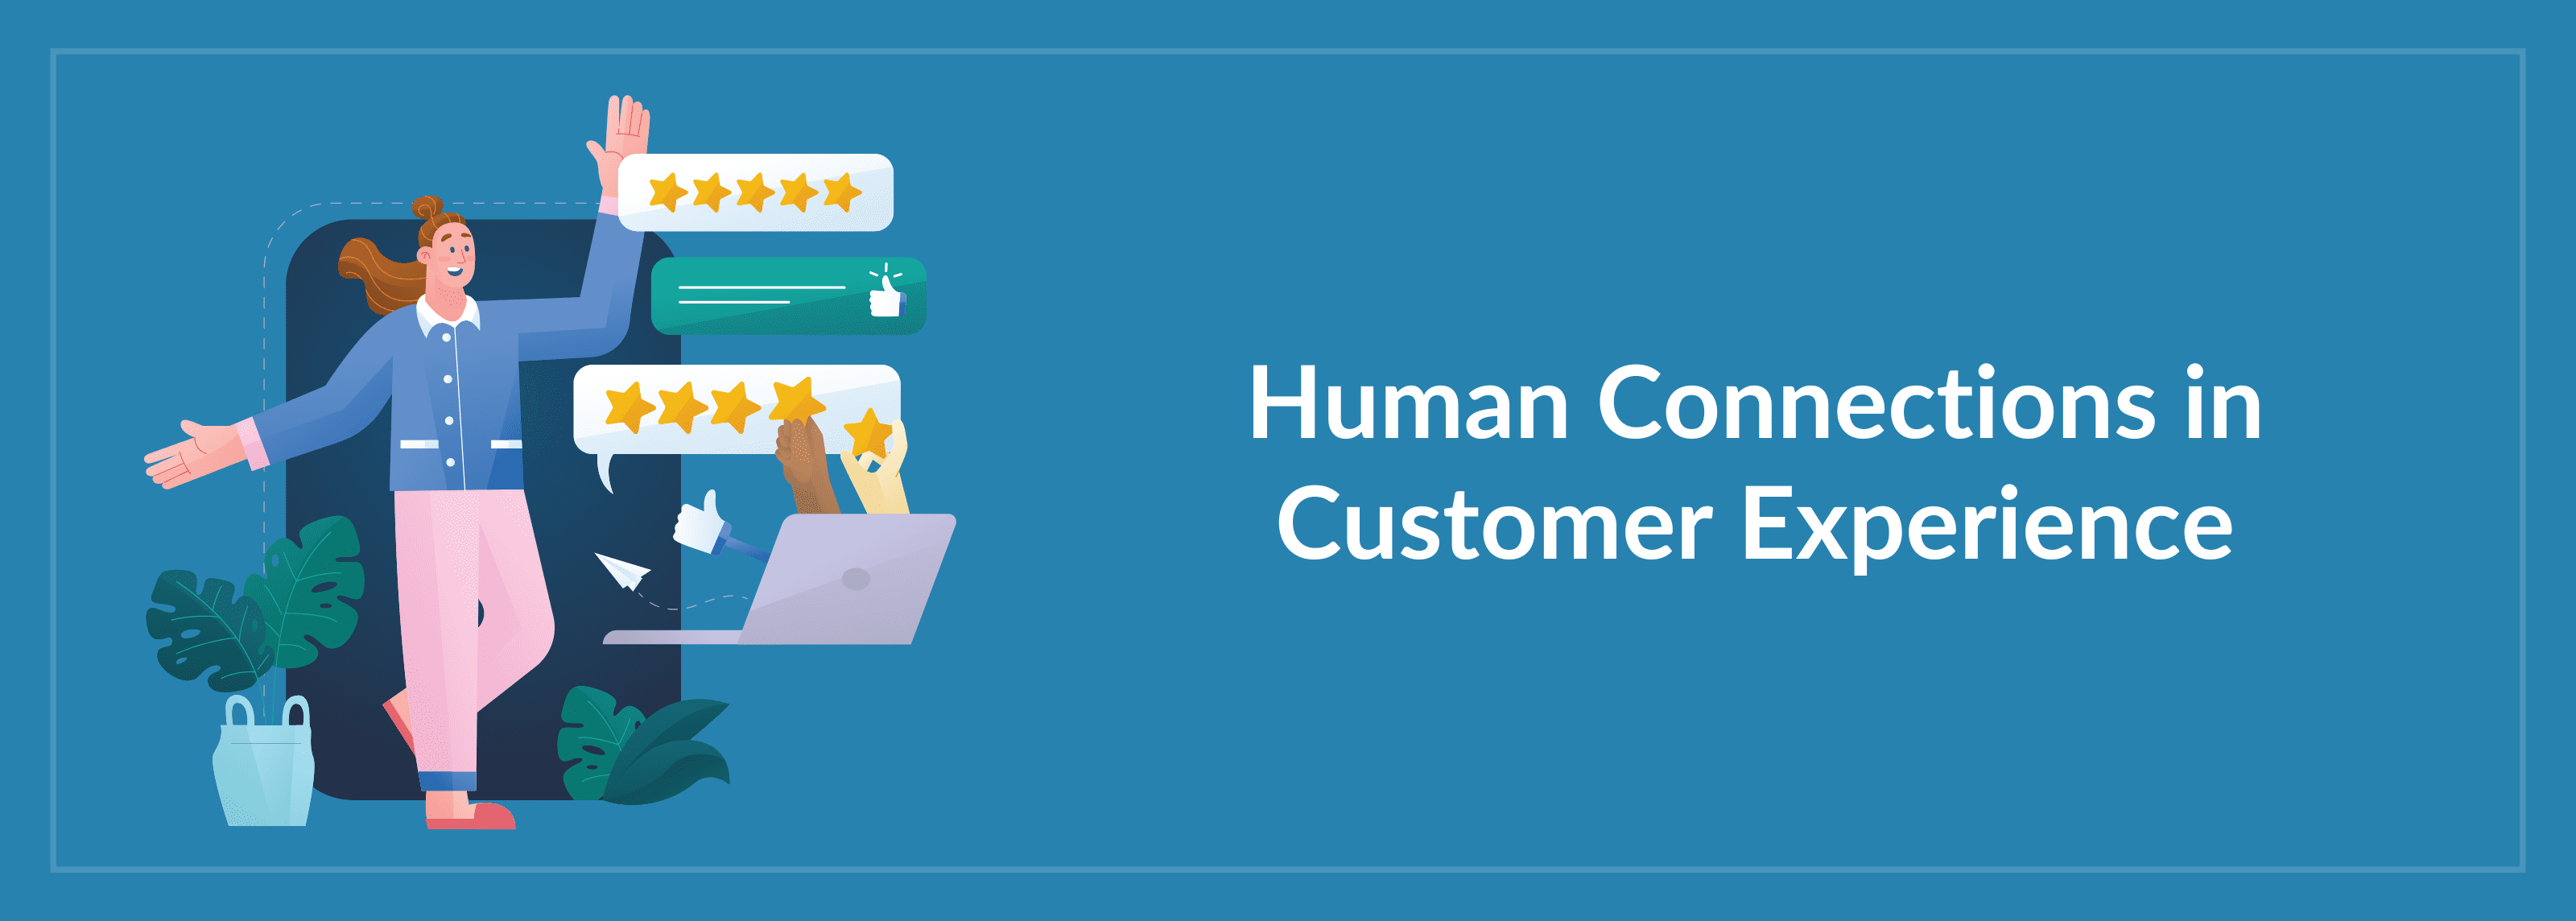 Human Connections in Customer Experience